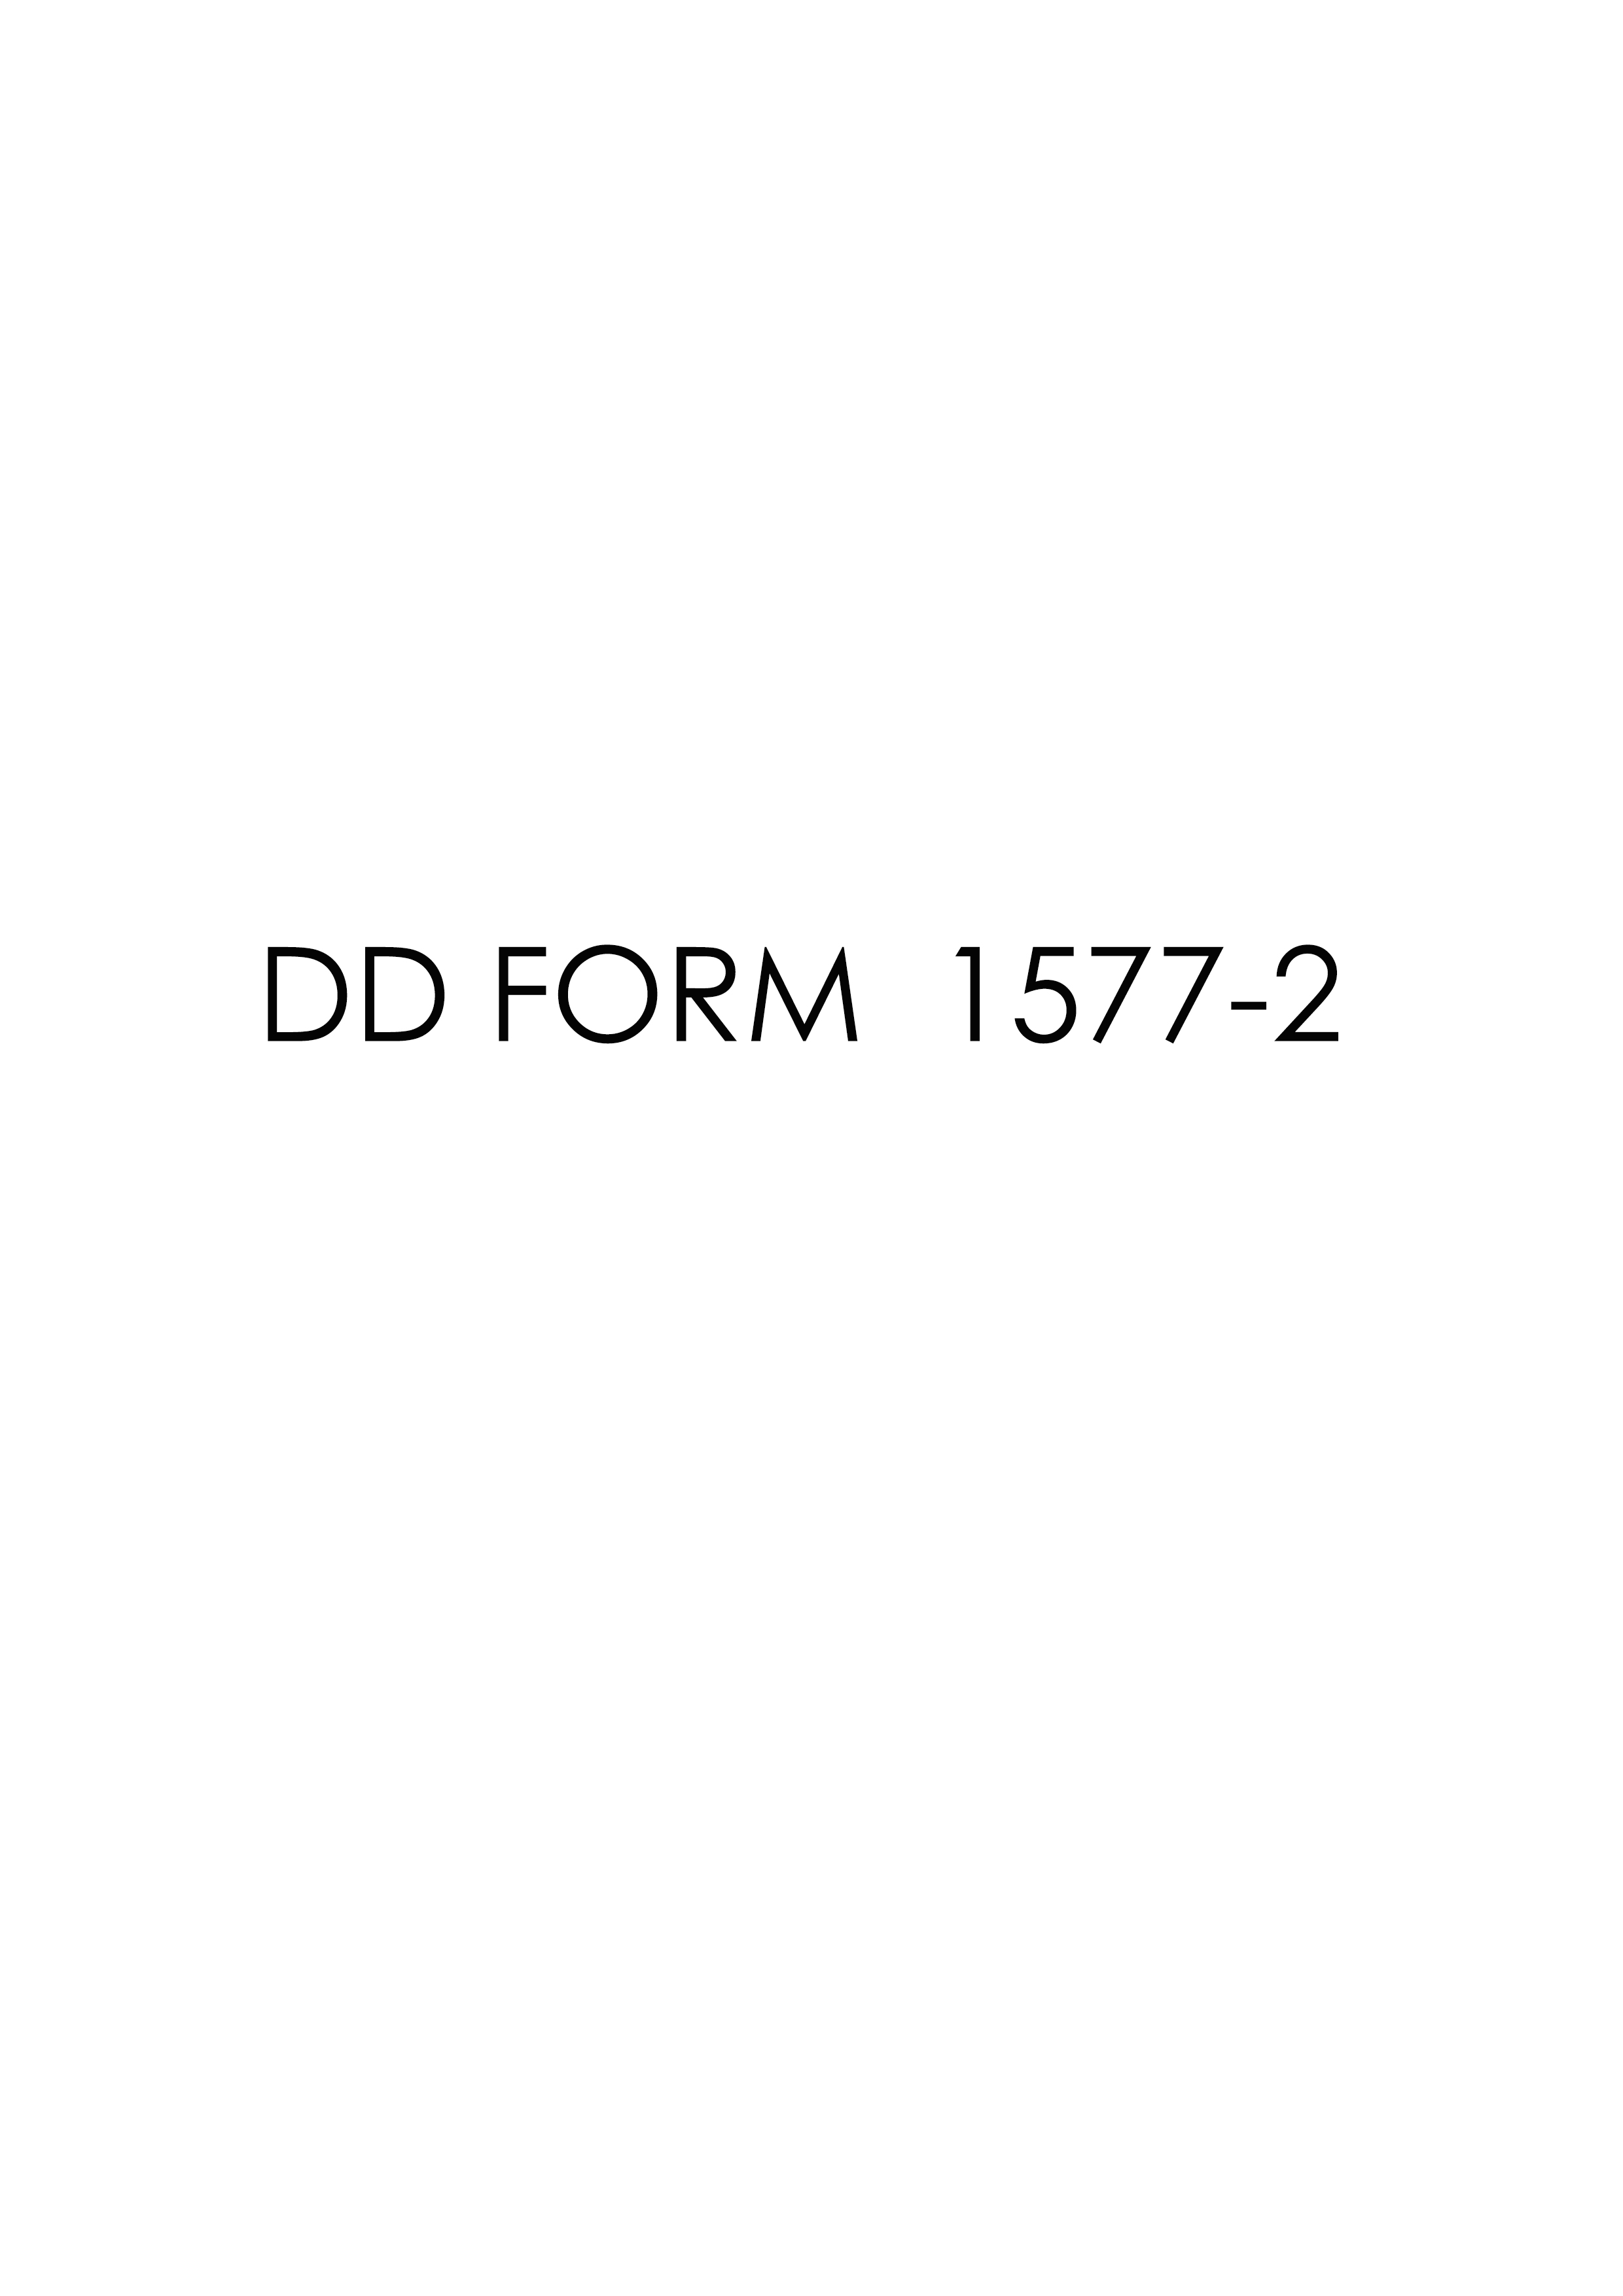 download-fillable-dd-form-1577-2-army-myservicesupport